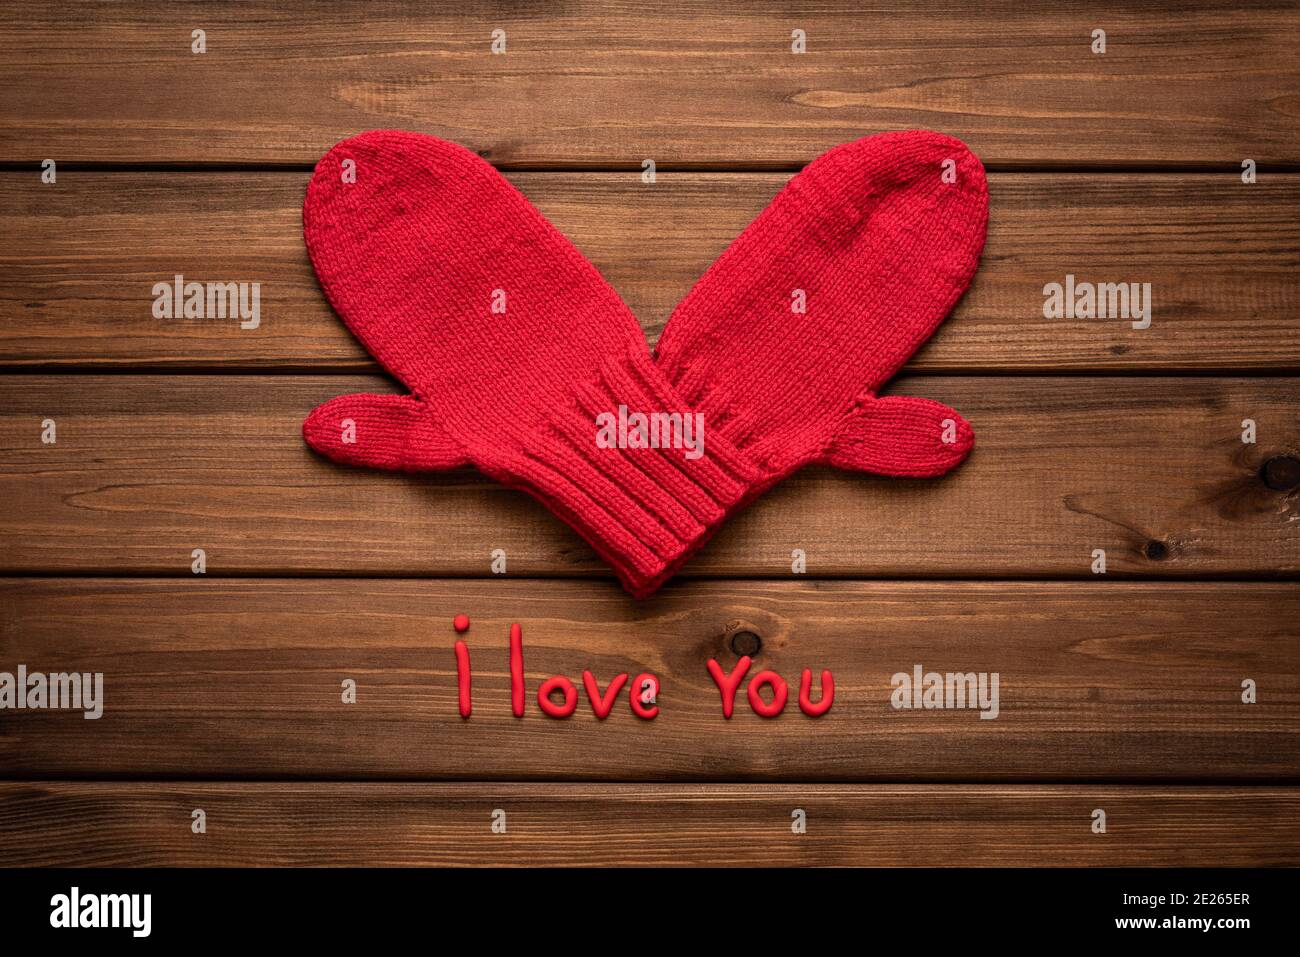 Valentines day card with heart made of red mittens on wooden vintage  background and phrase about love Stock Photo - Alamy